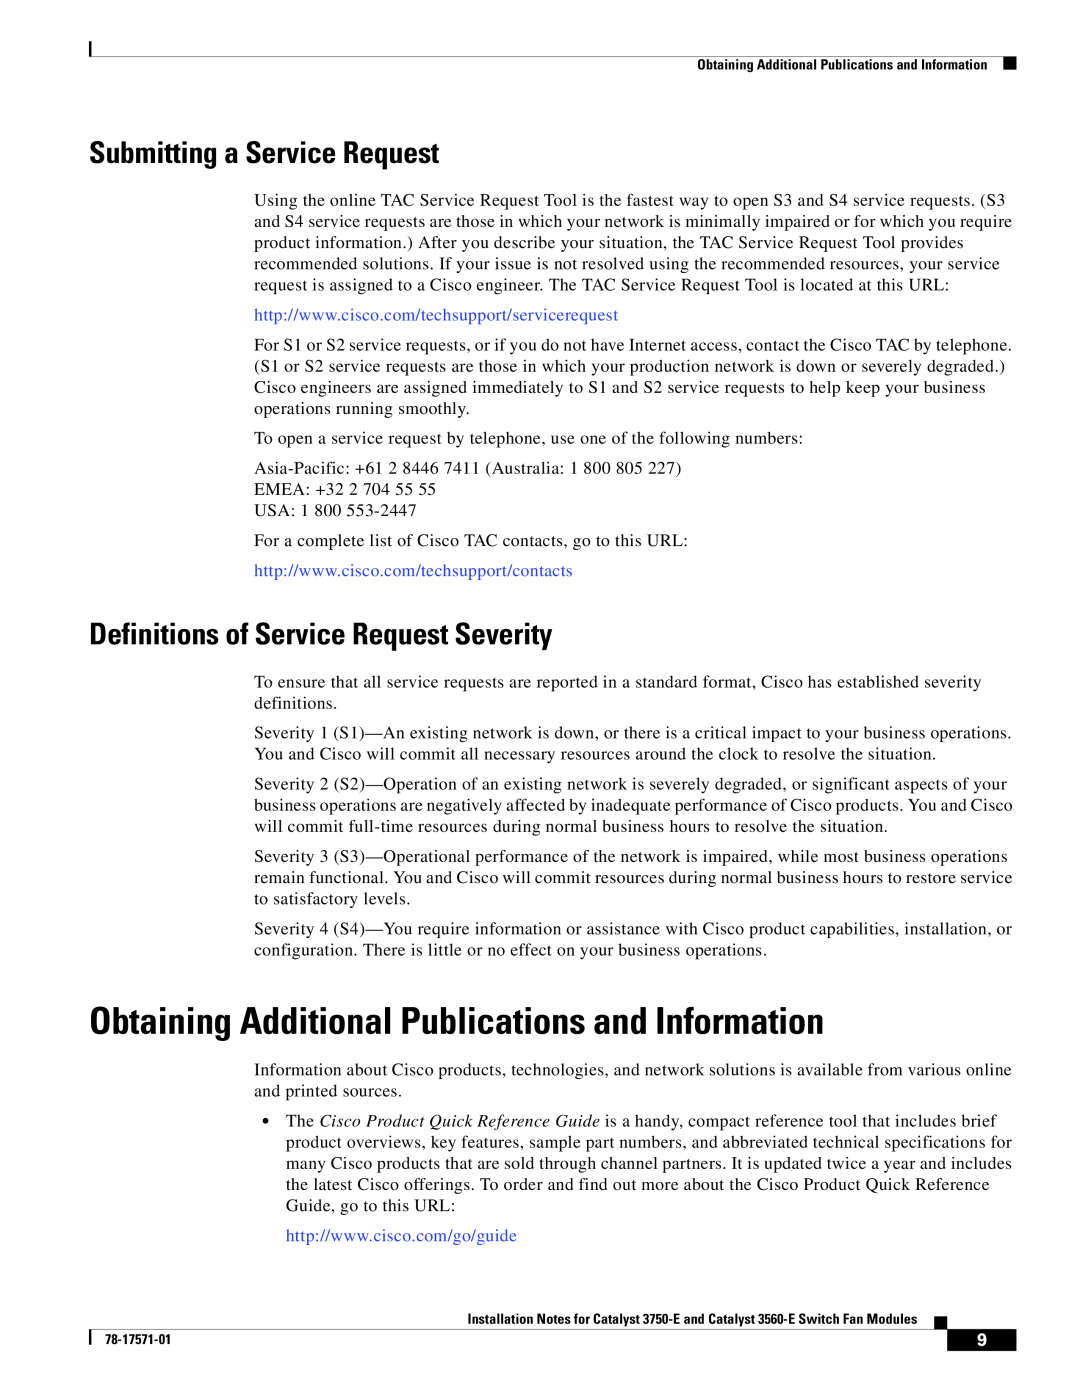 Cisco Systems Catalyst 3560-E Obtaining Additional Publications and Information, Submitting a Service Request 